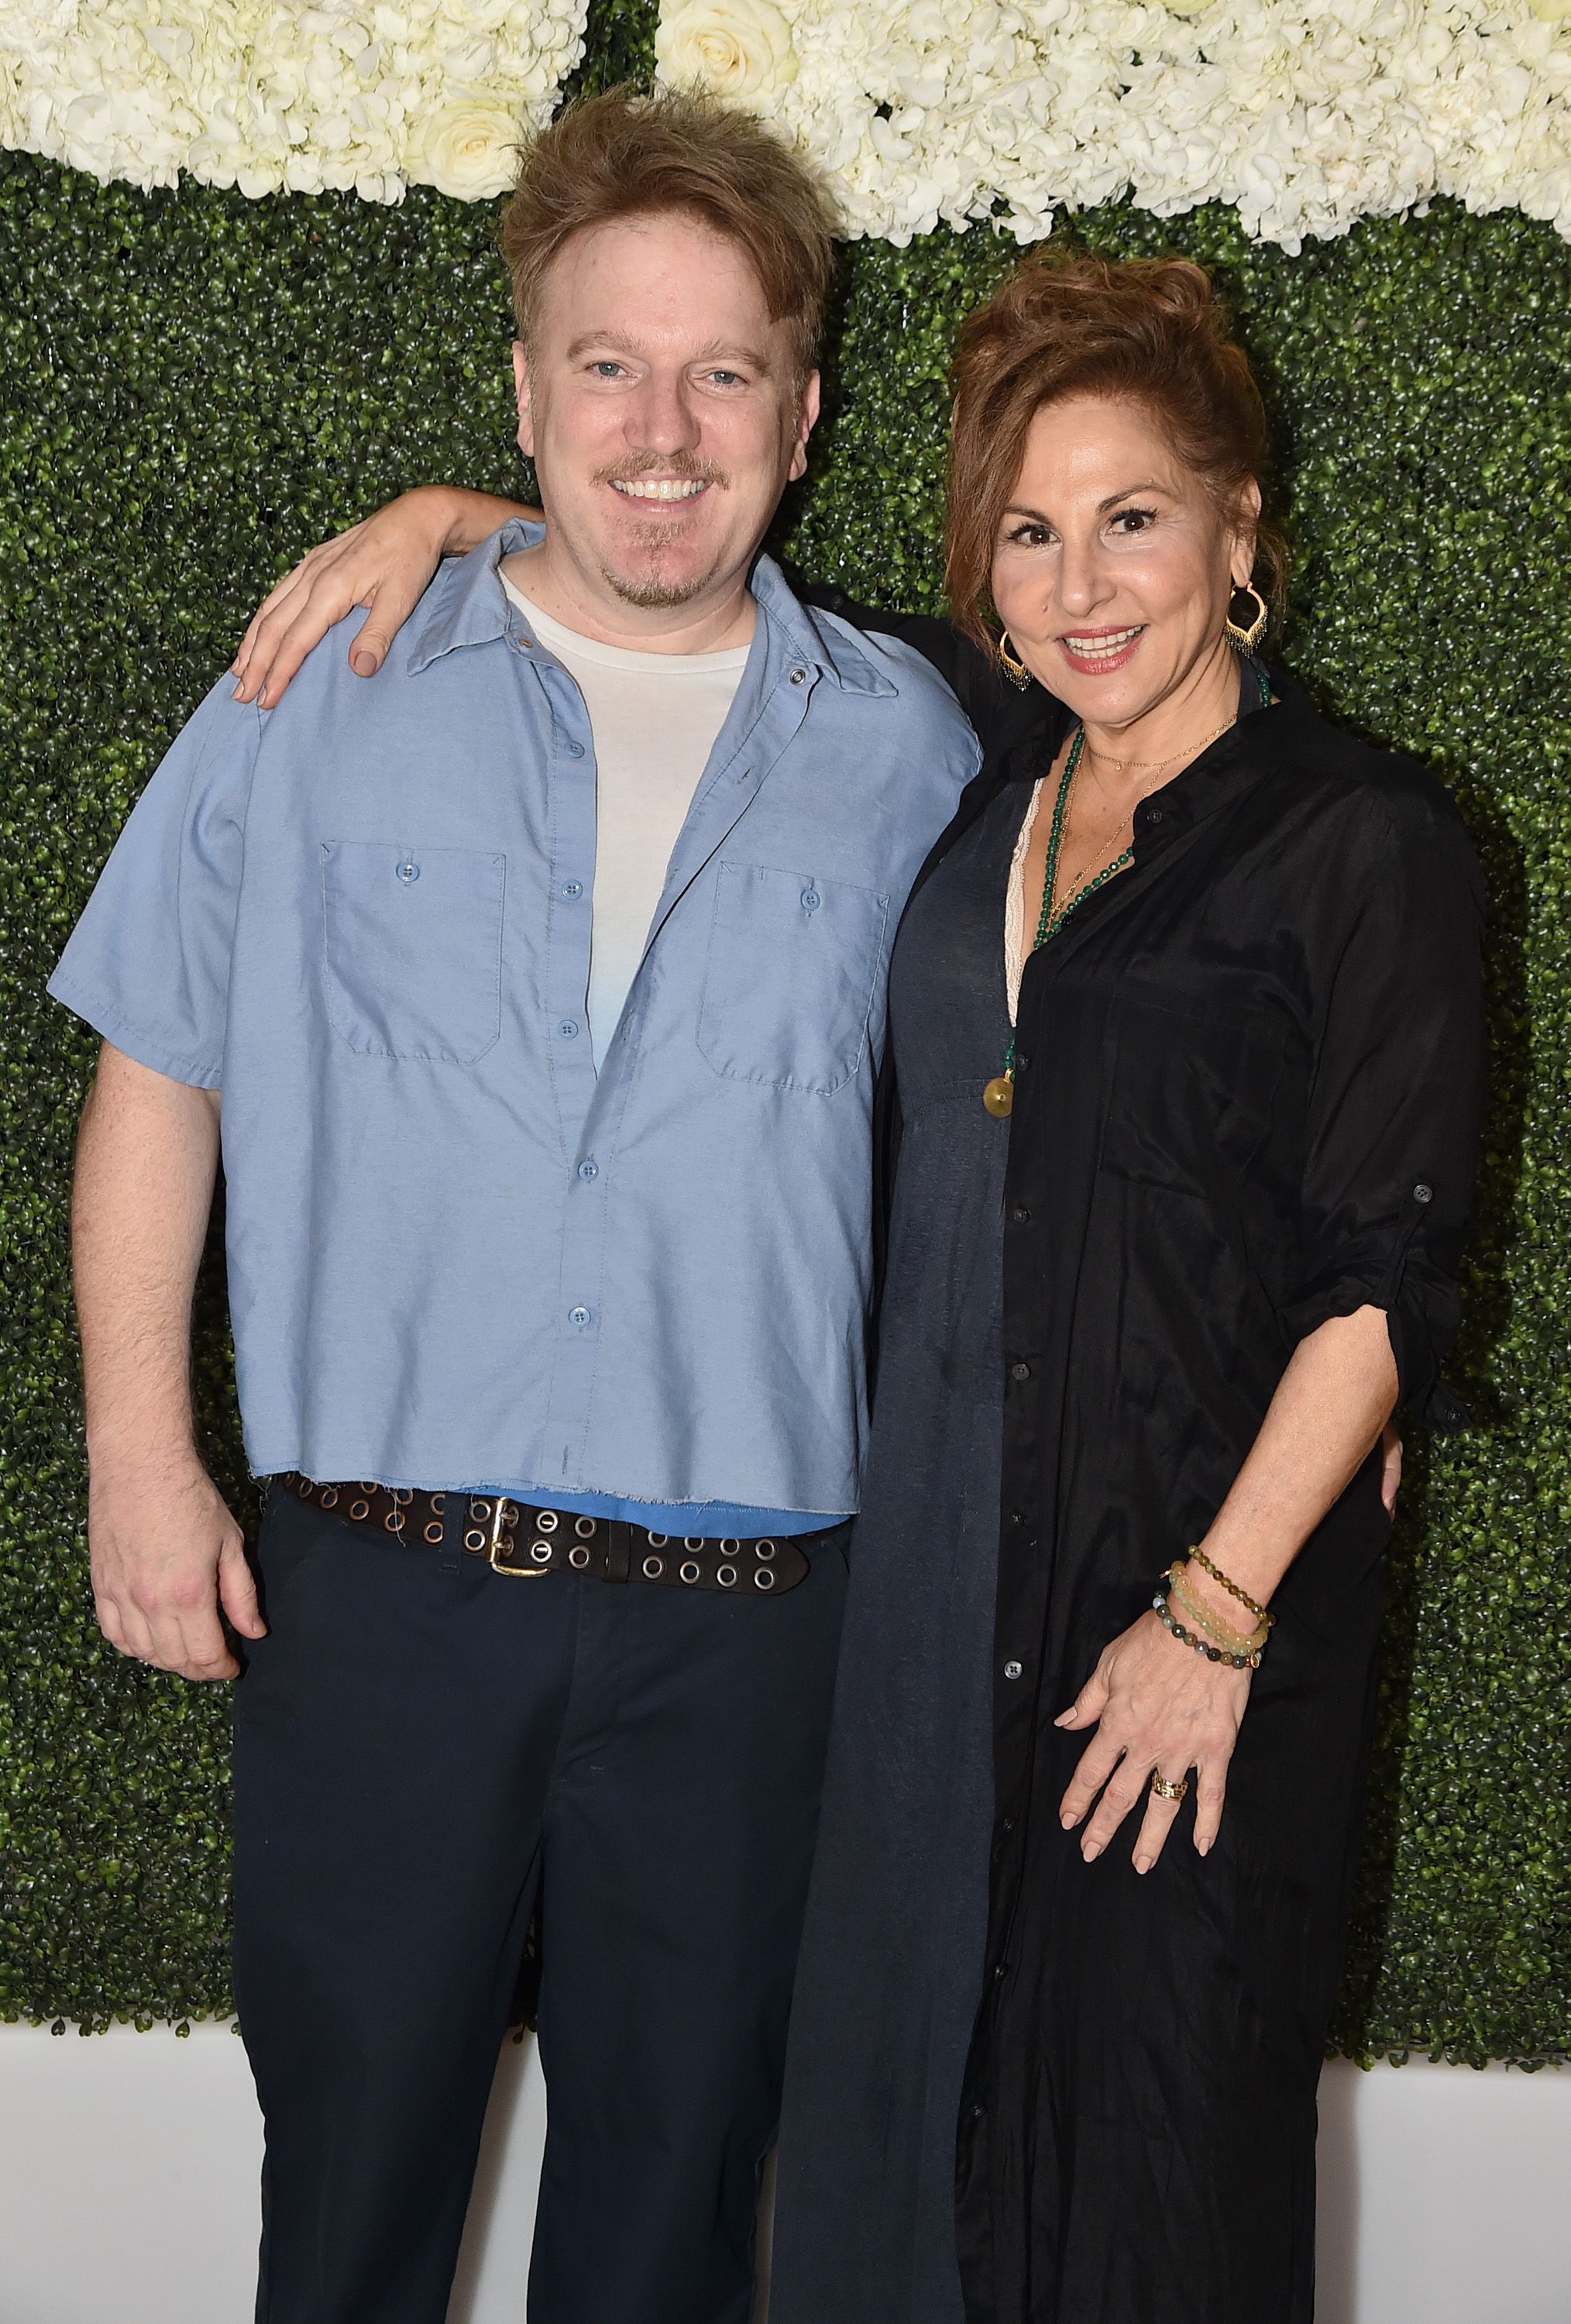  Dan Finnerty and Kathy Najimy at Atlantis Paradise Island in 2017 in The Bahamas | Source: Getty Images